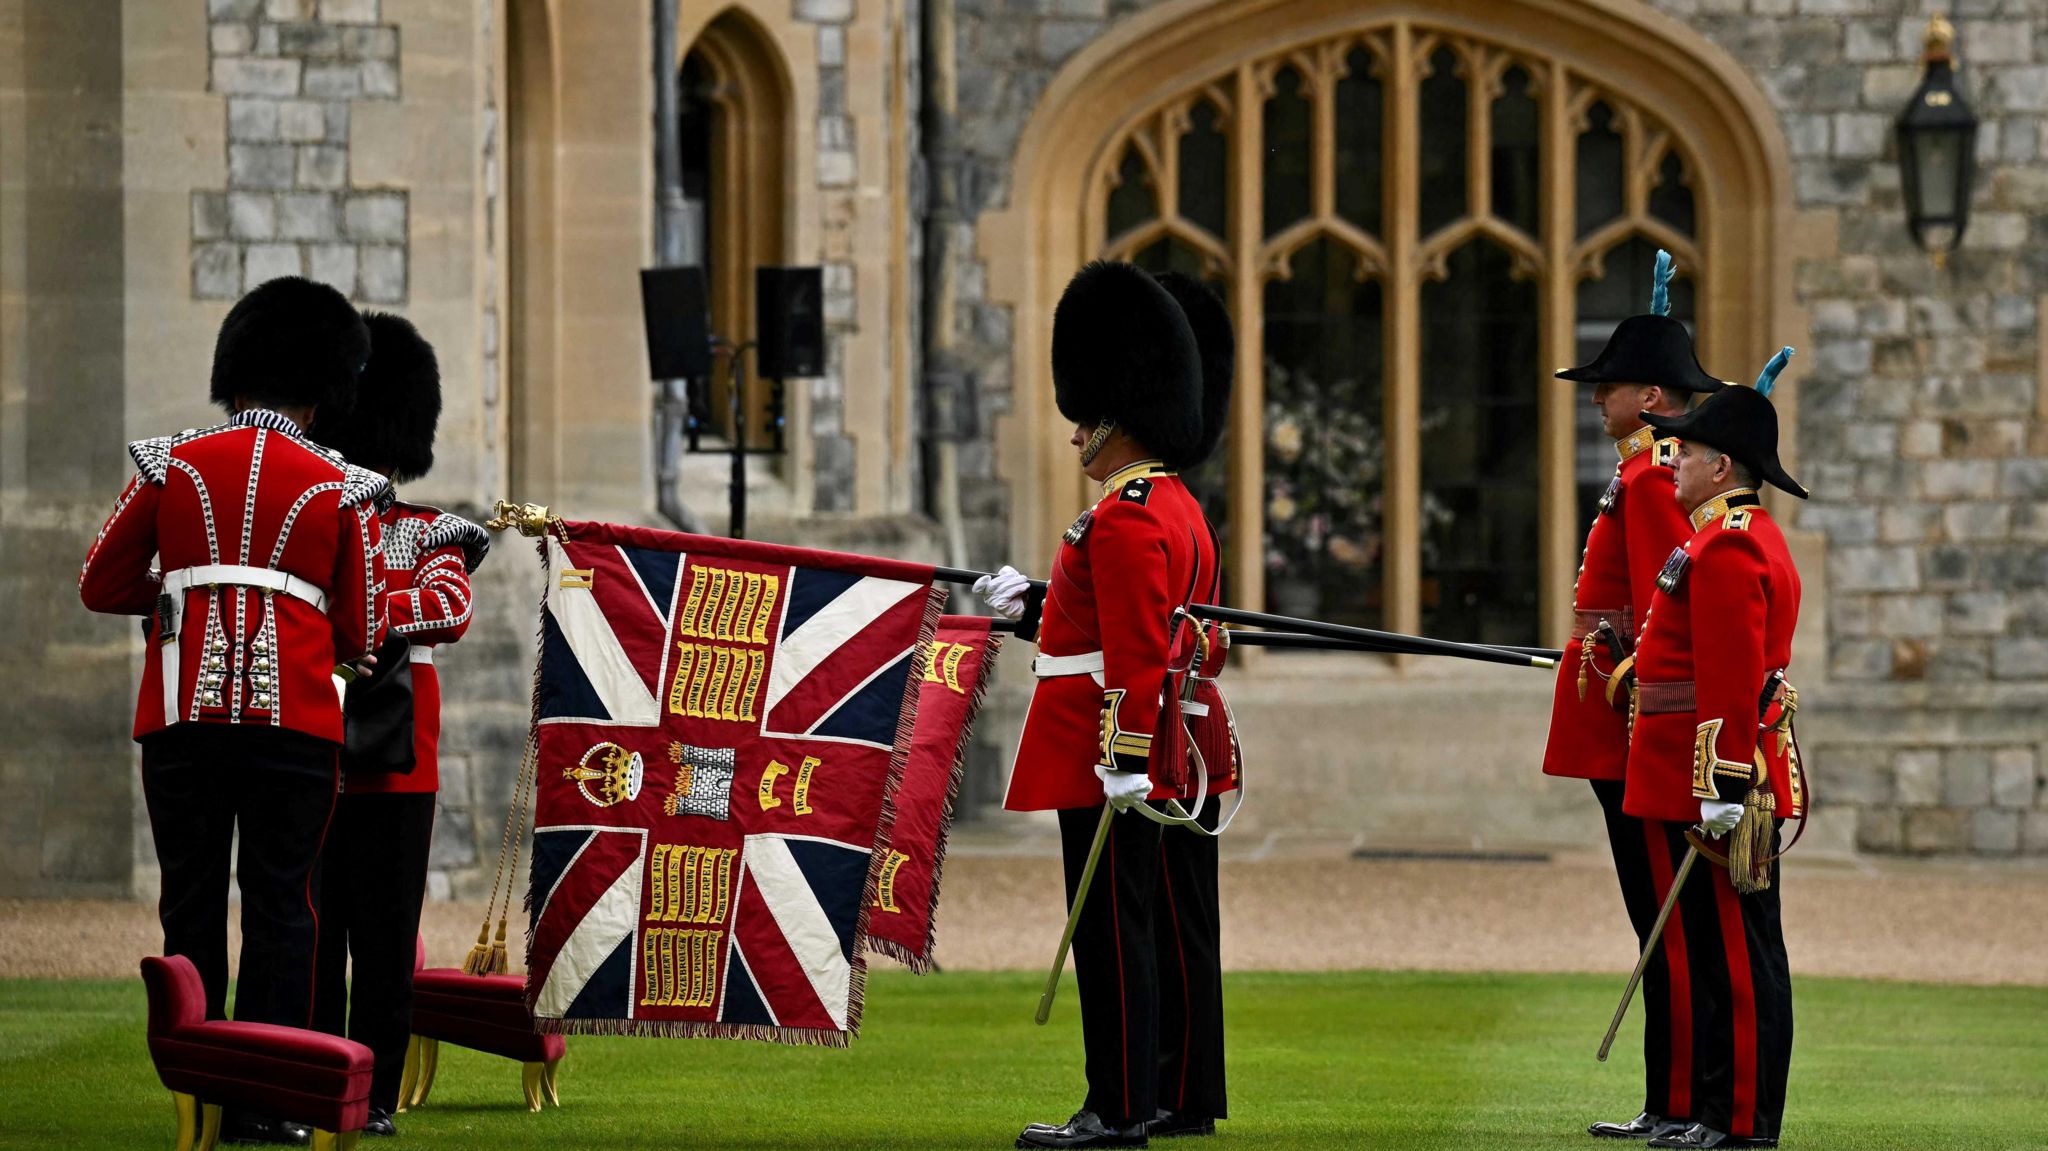 The Irish Guards in full dress - black trousers with a red stripe down each side, a red jacket with military regalia and white belt, plus white gloves and a busby hat. Some car decorative swords and the new flags. Photo taken outside Windsor Castle